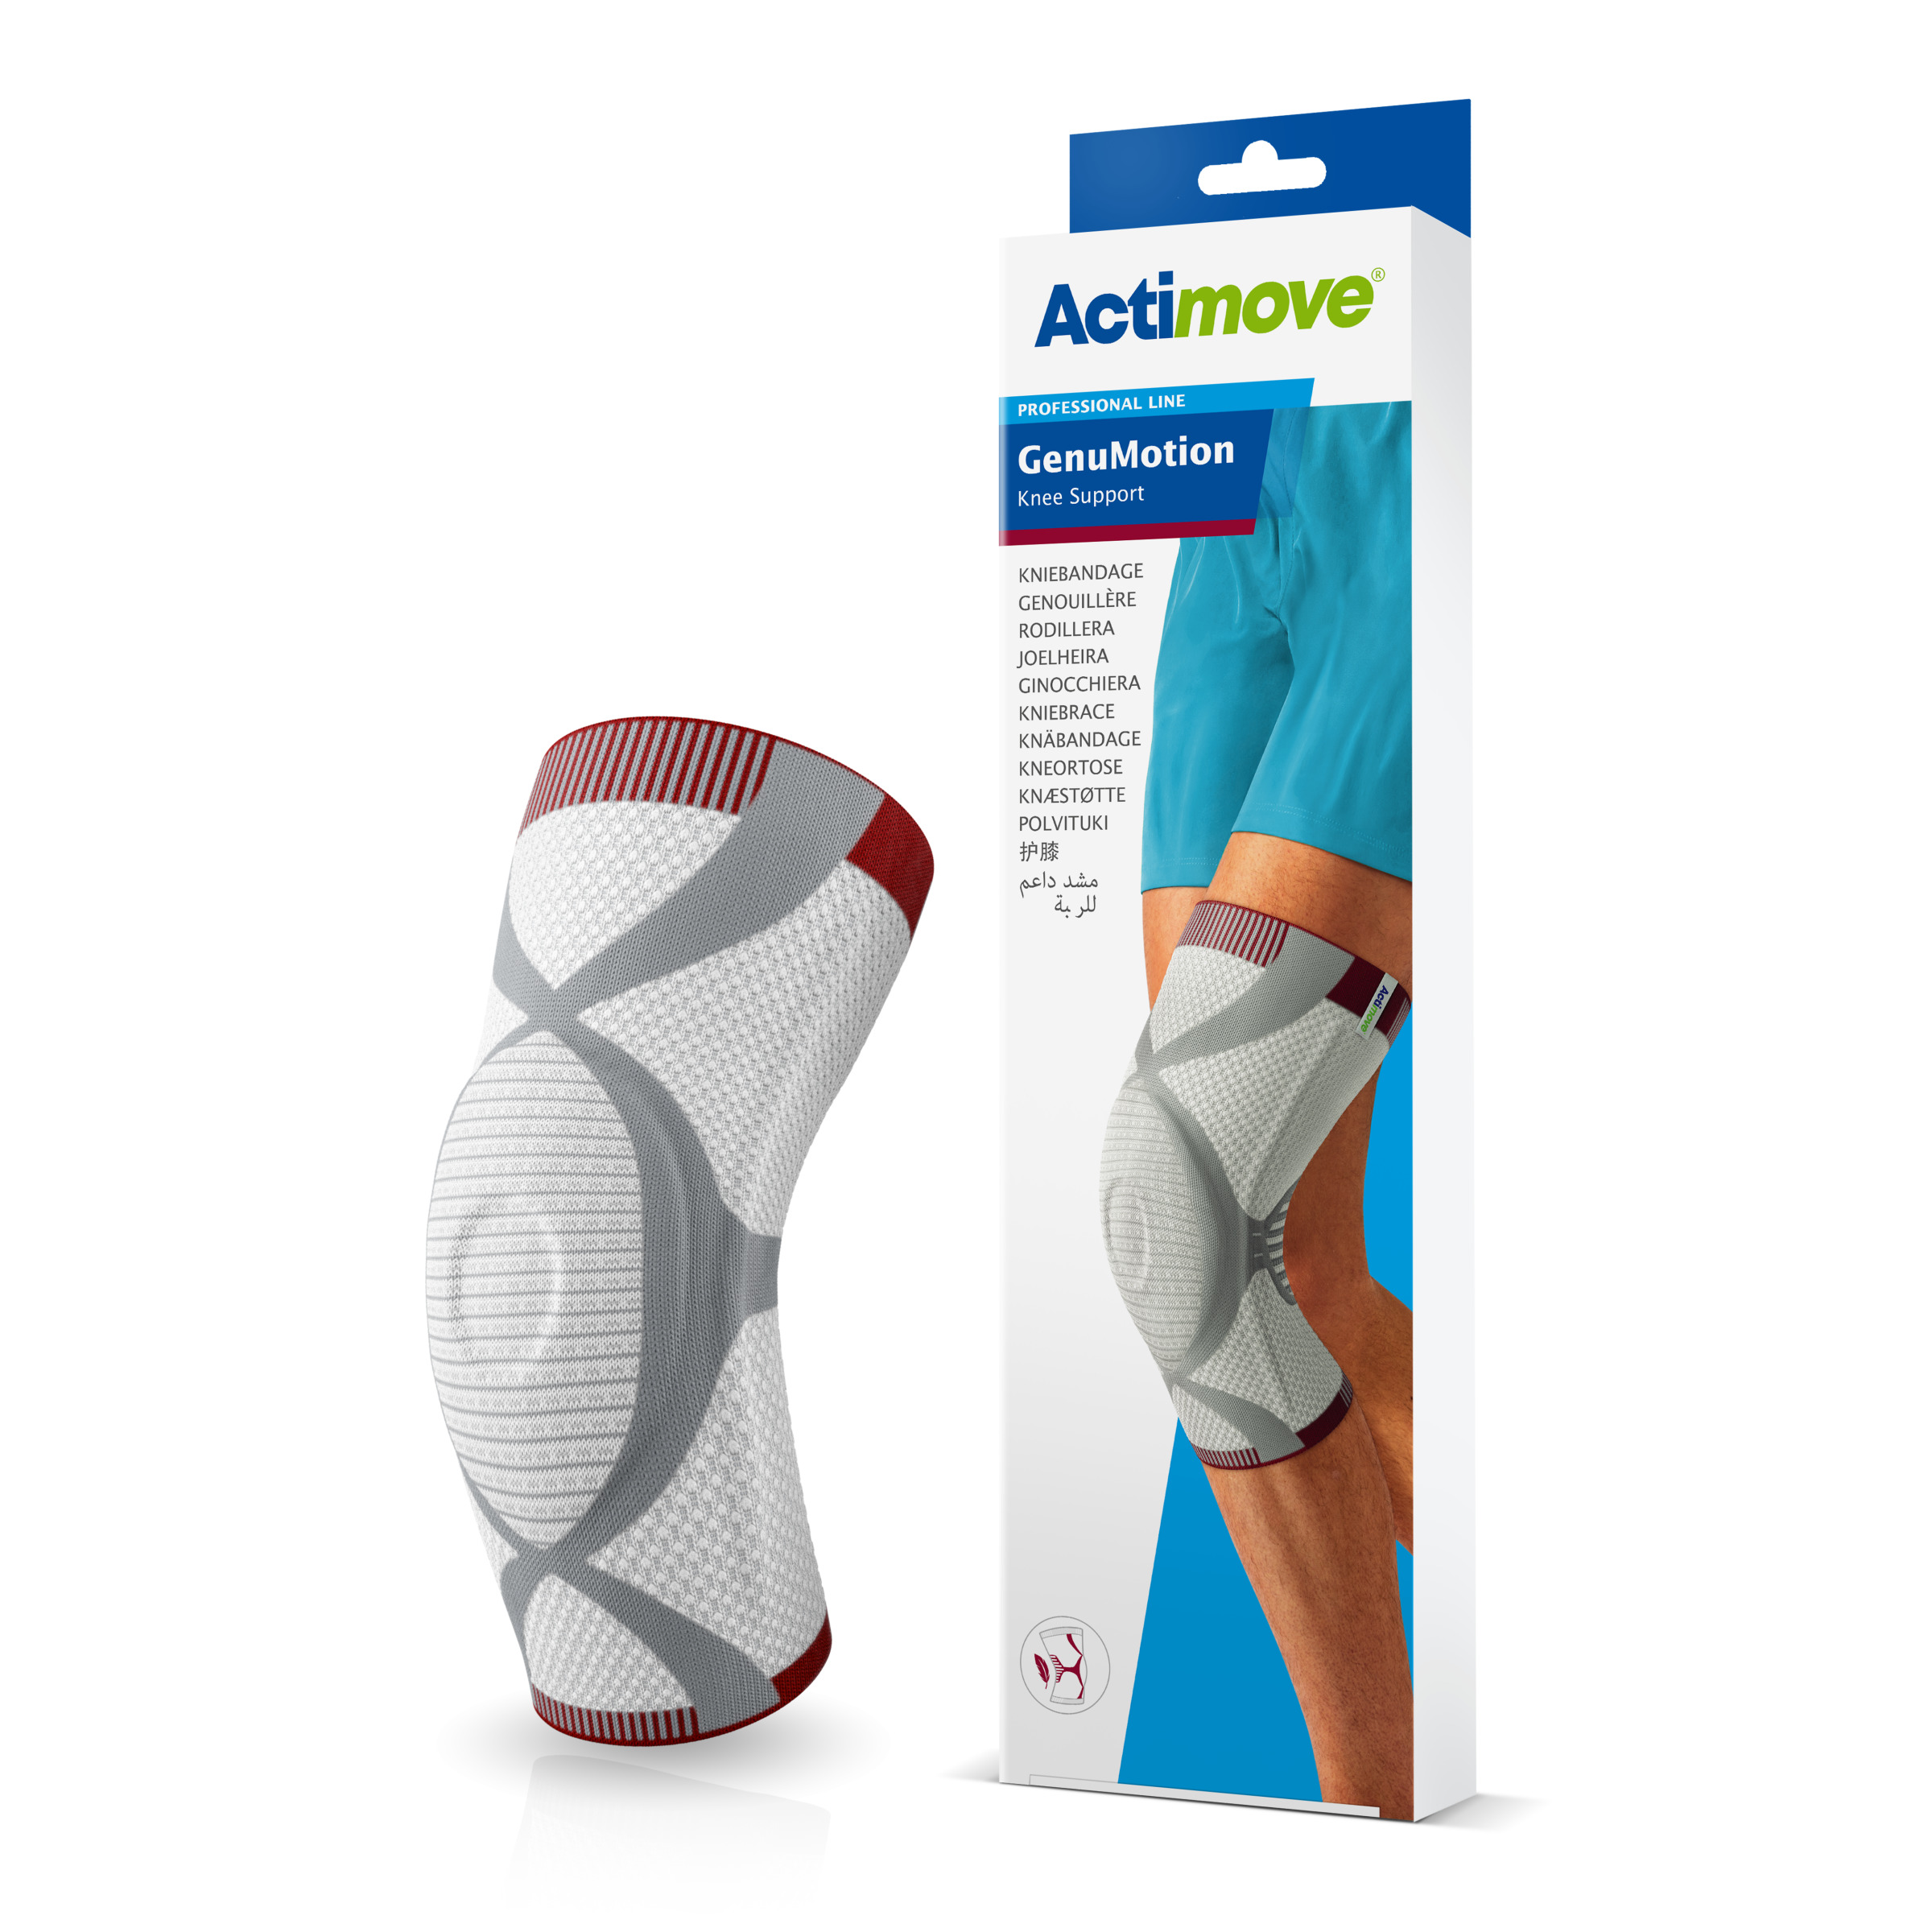 Revolutionary Knee Supports For Arthritis - Active650